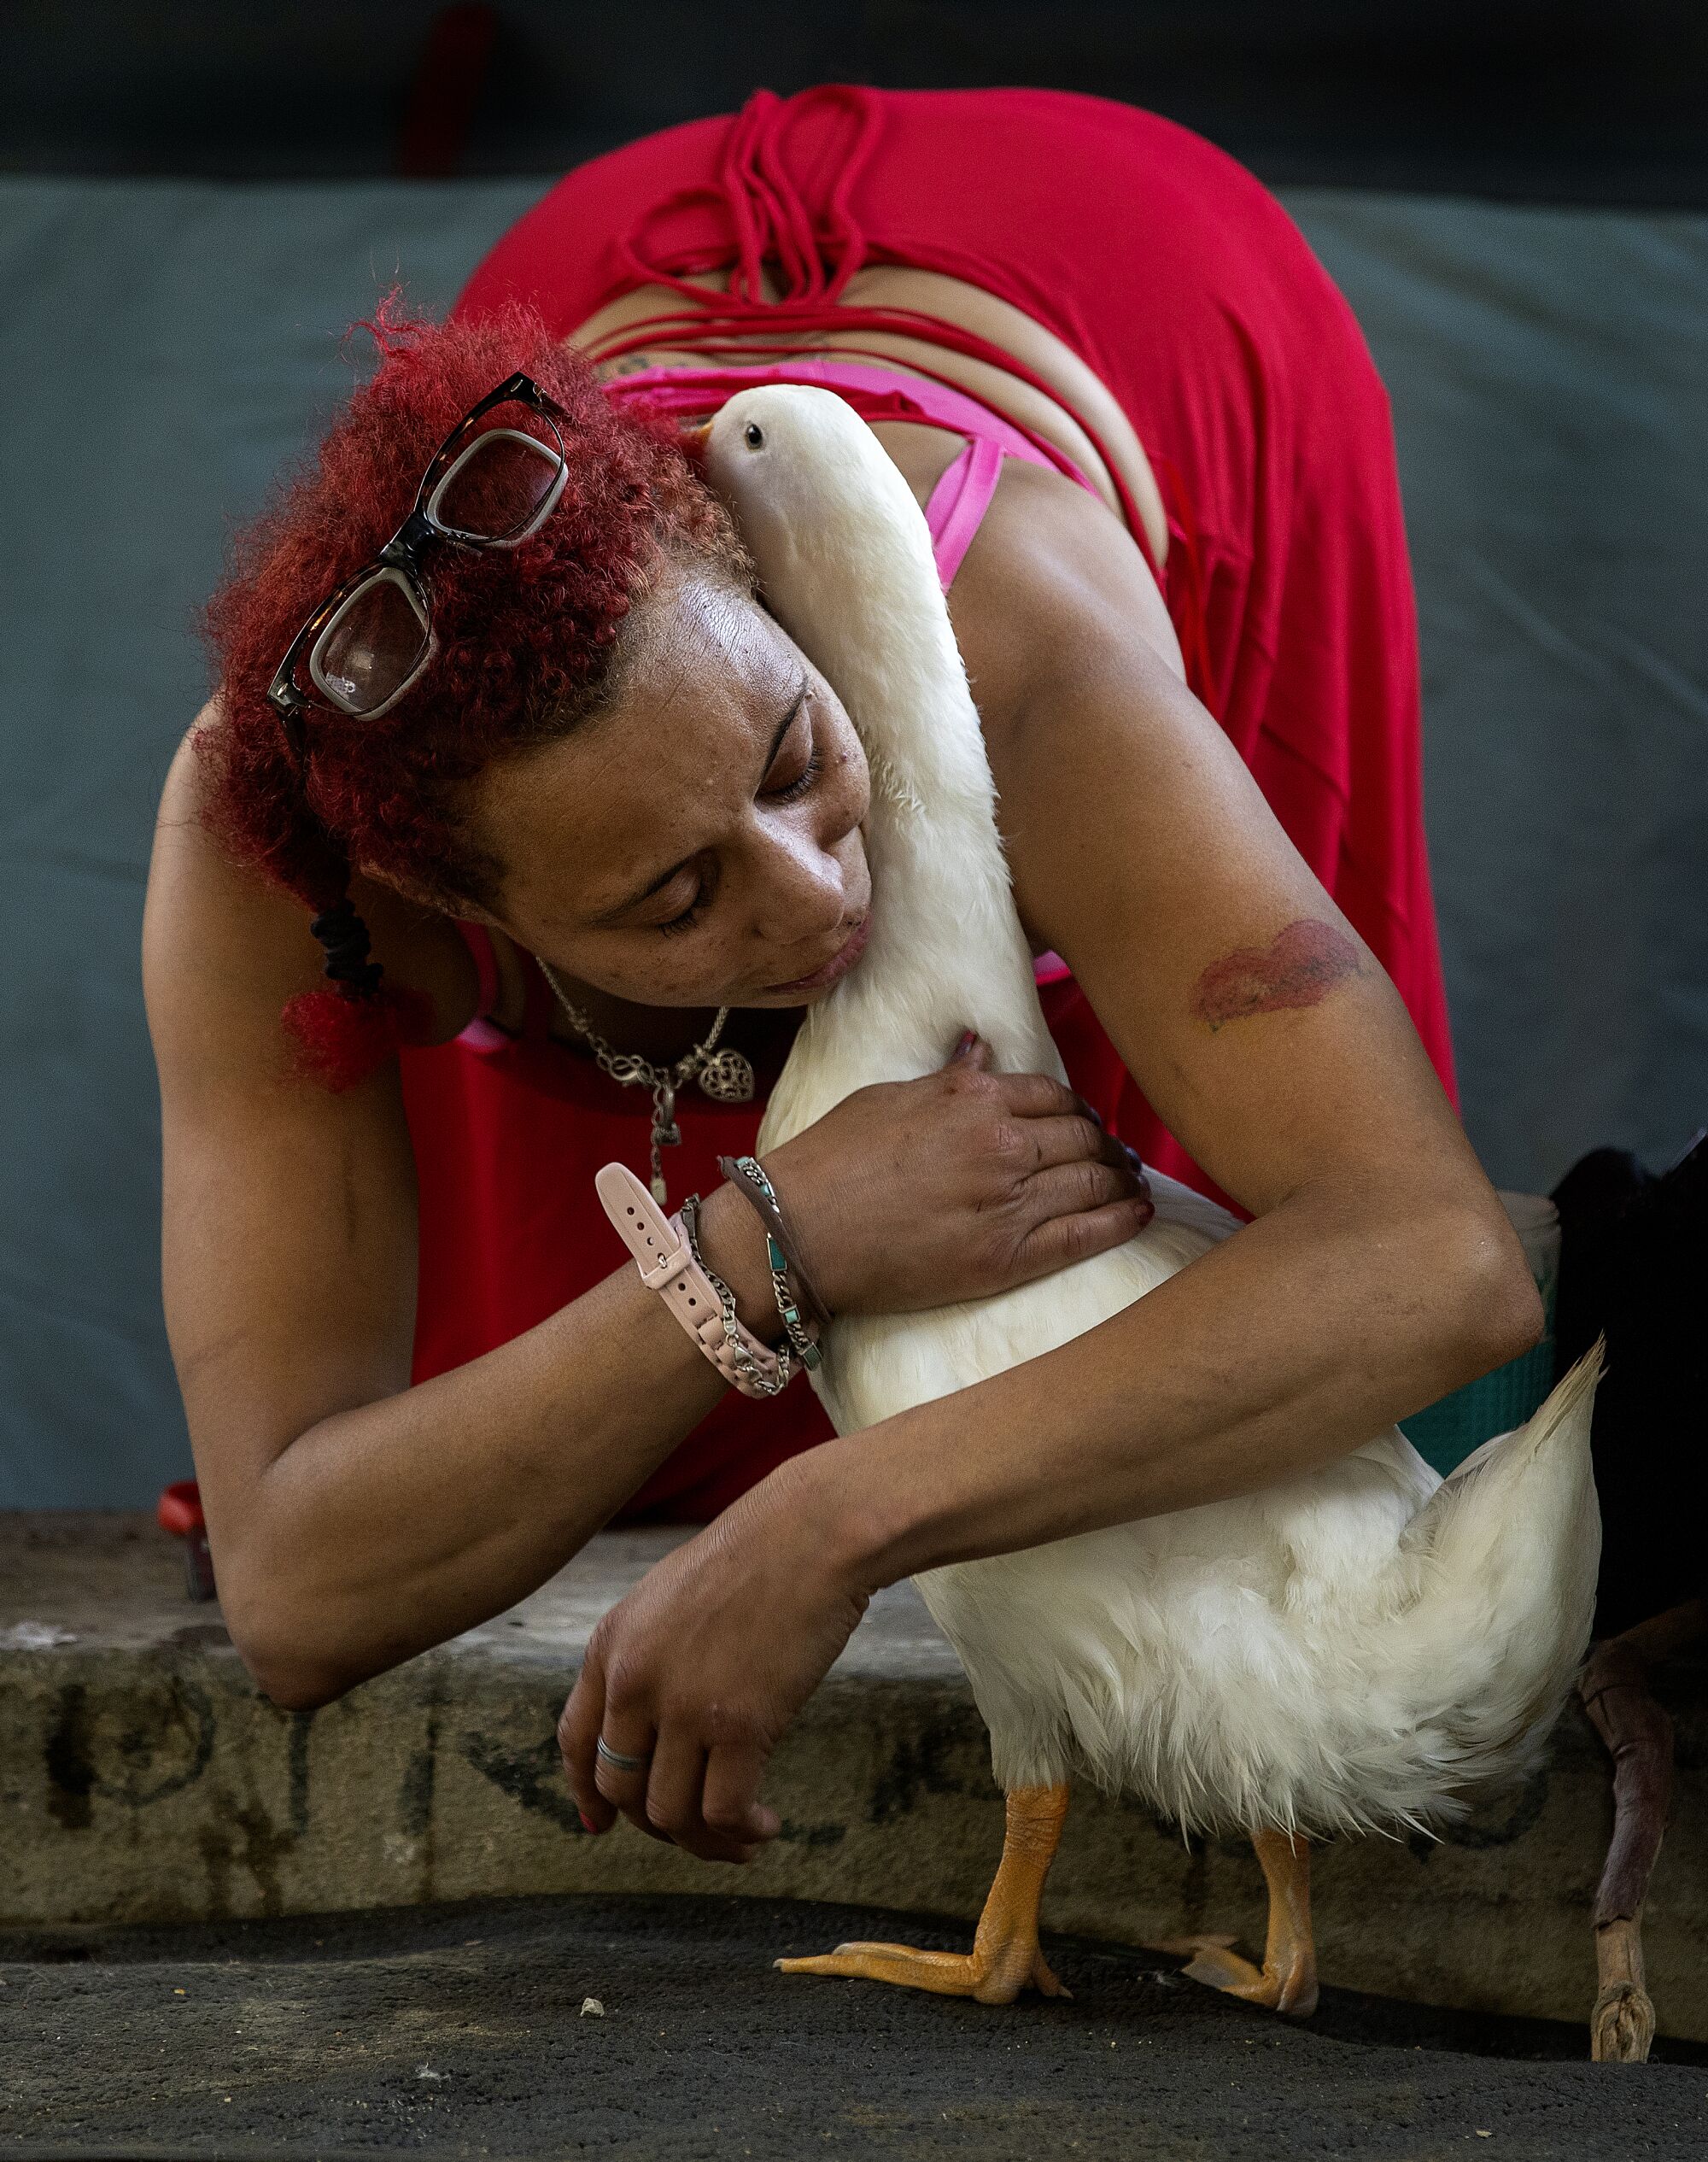 McWilliams hugs her emotional support animal, a male,Pekin duck she named Cardi D, outside her tent at a homeless encampment